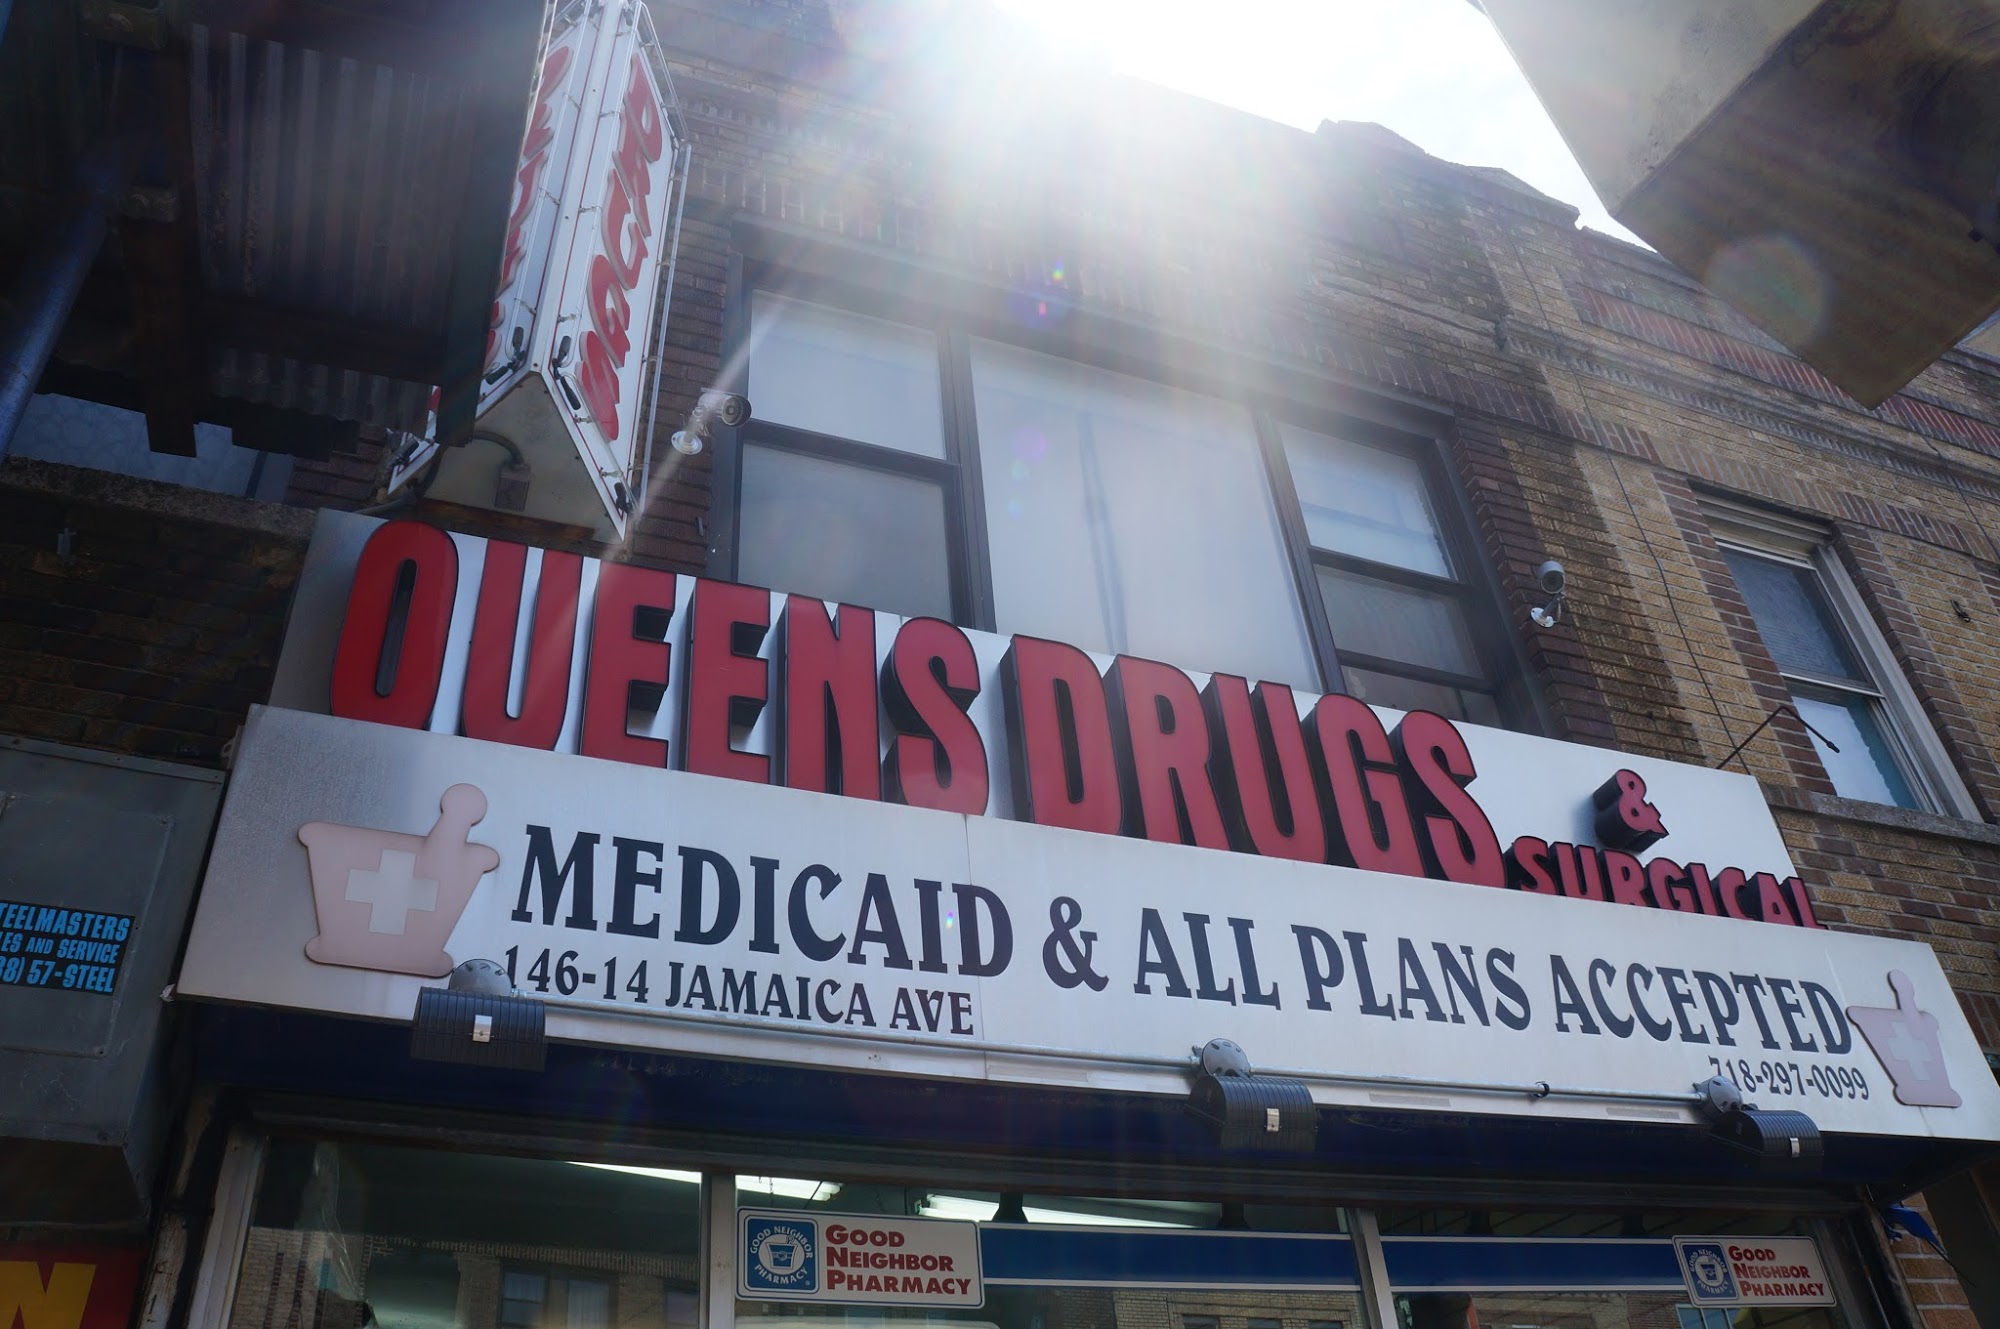 Queens Drugs & Surgical